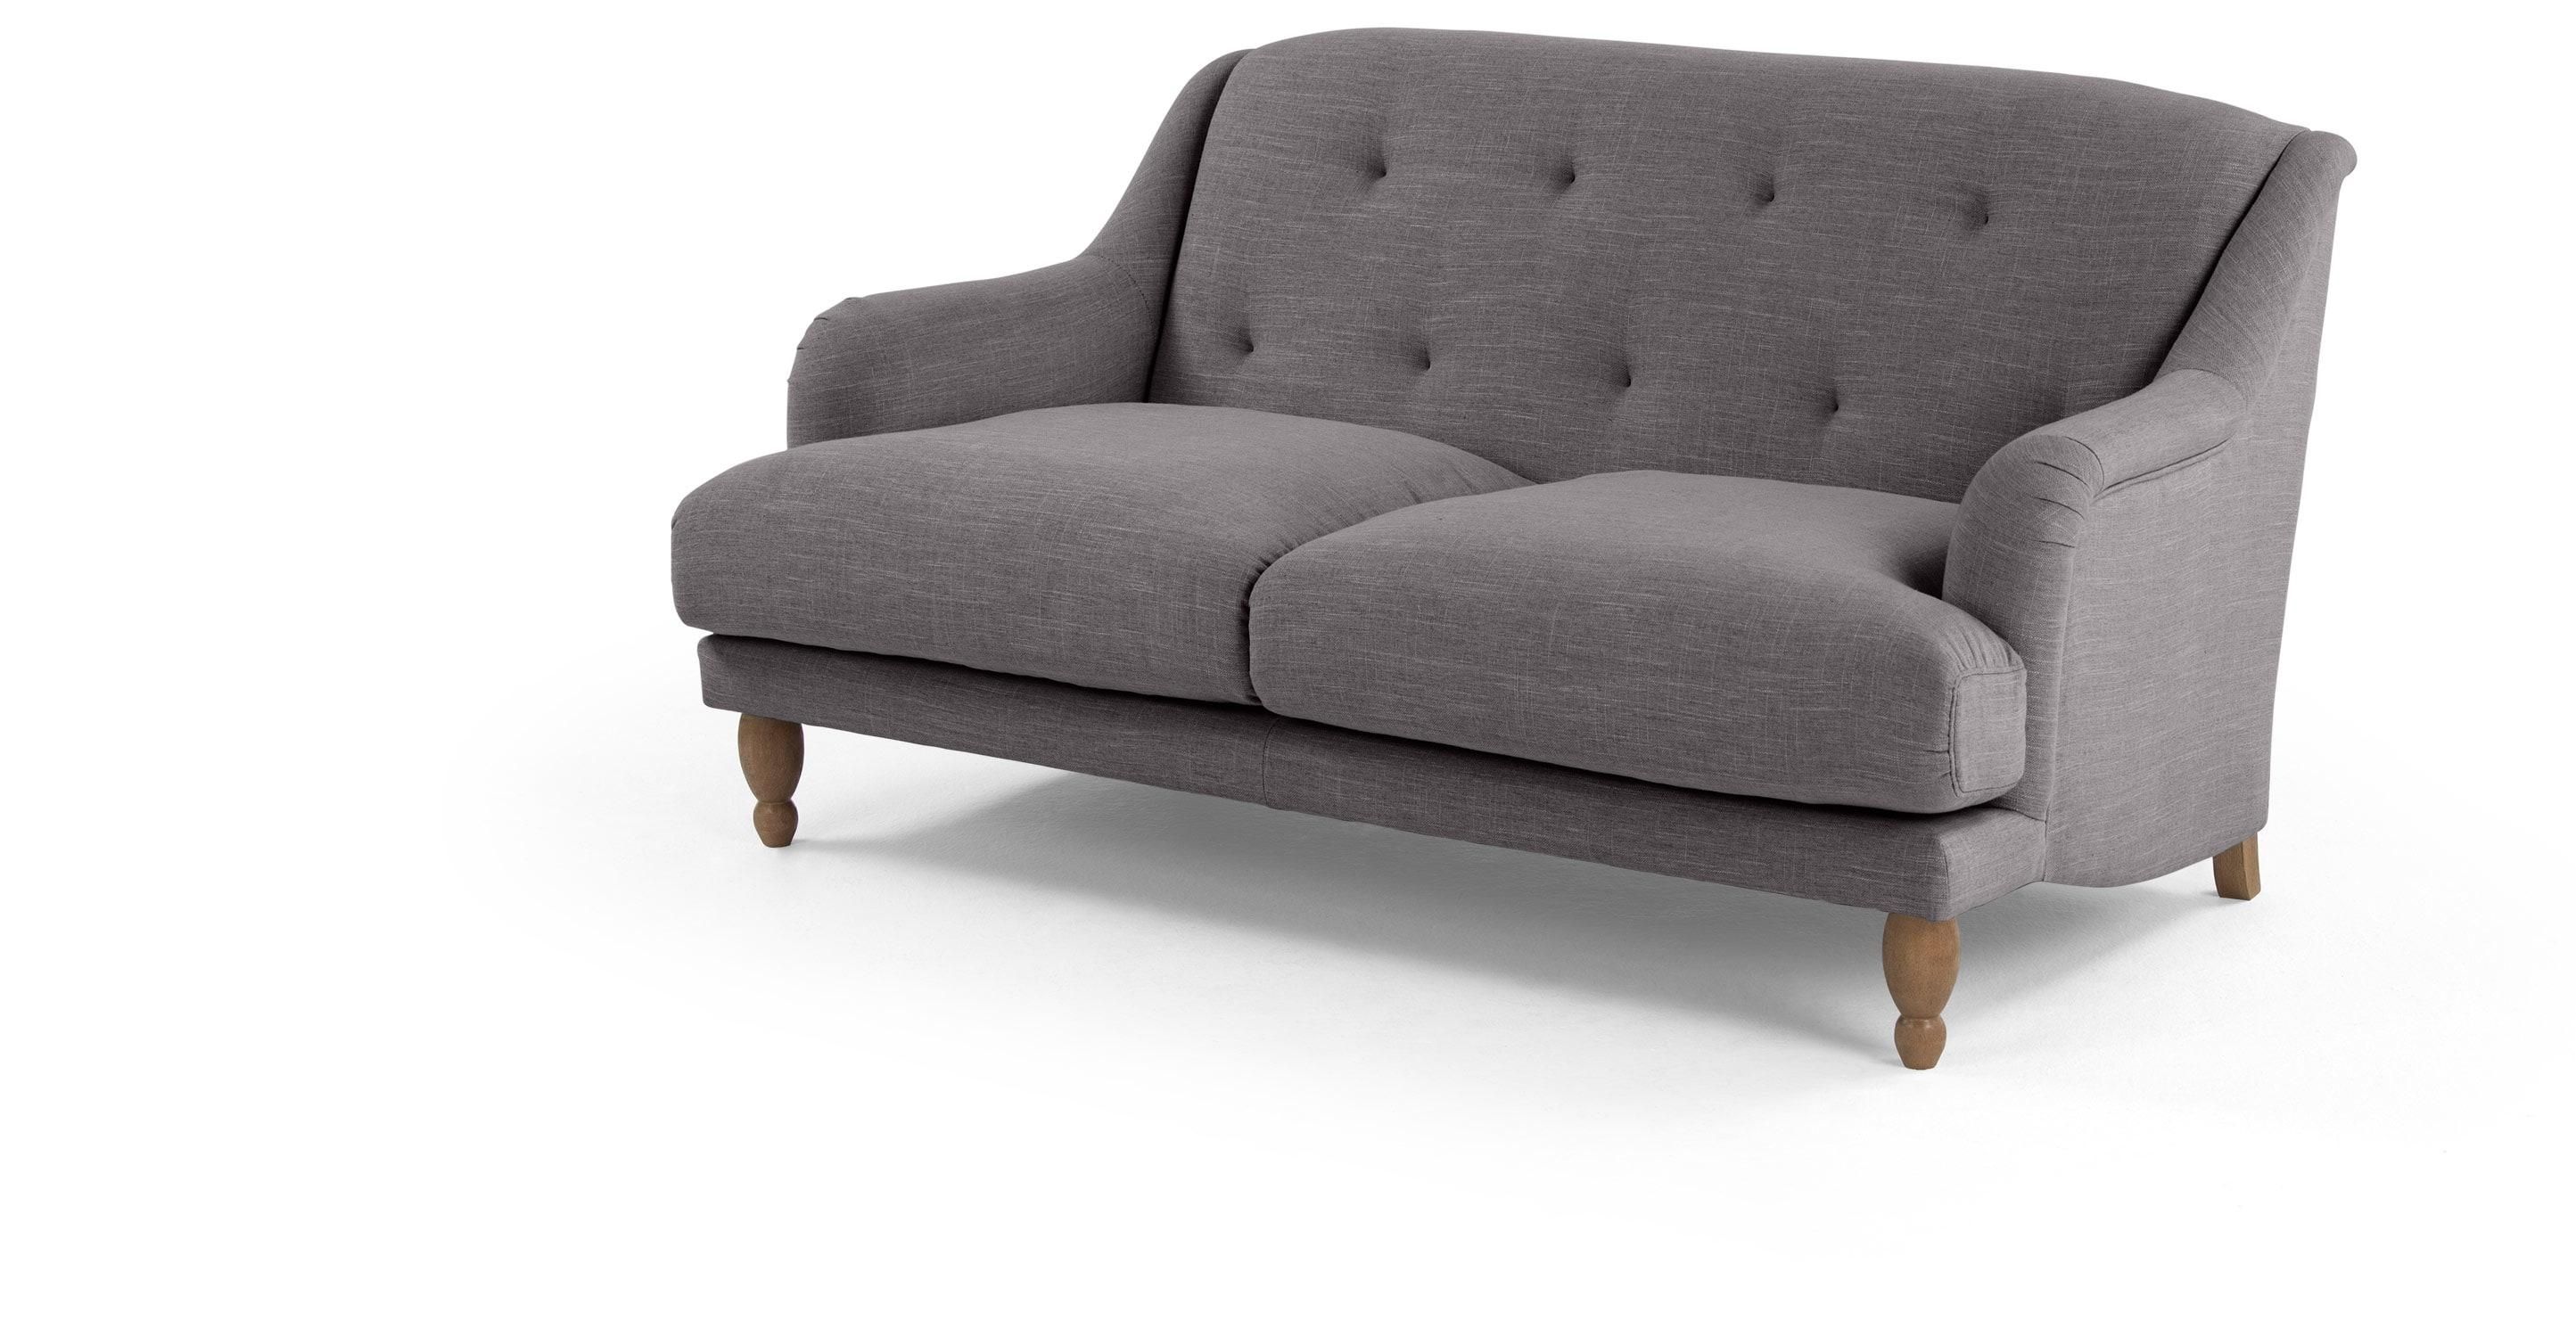 Ariana 2 Seater Sofa, Graphite Grey | Made Intended For 2 Seater Sofas (View 20 of 20)